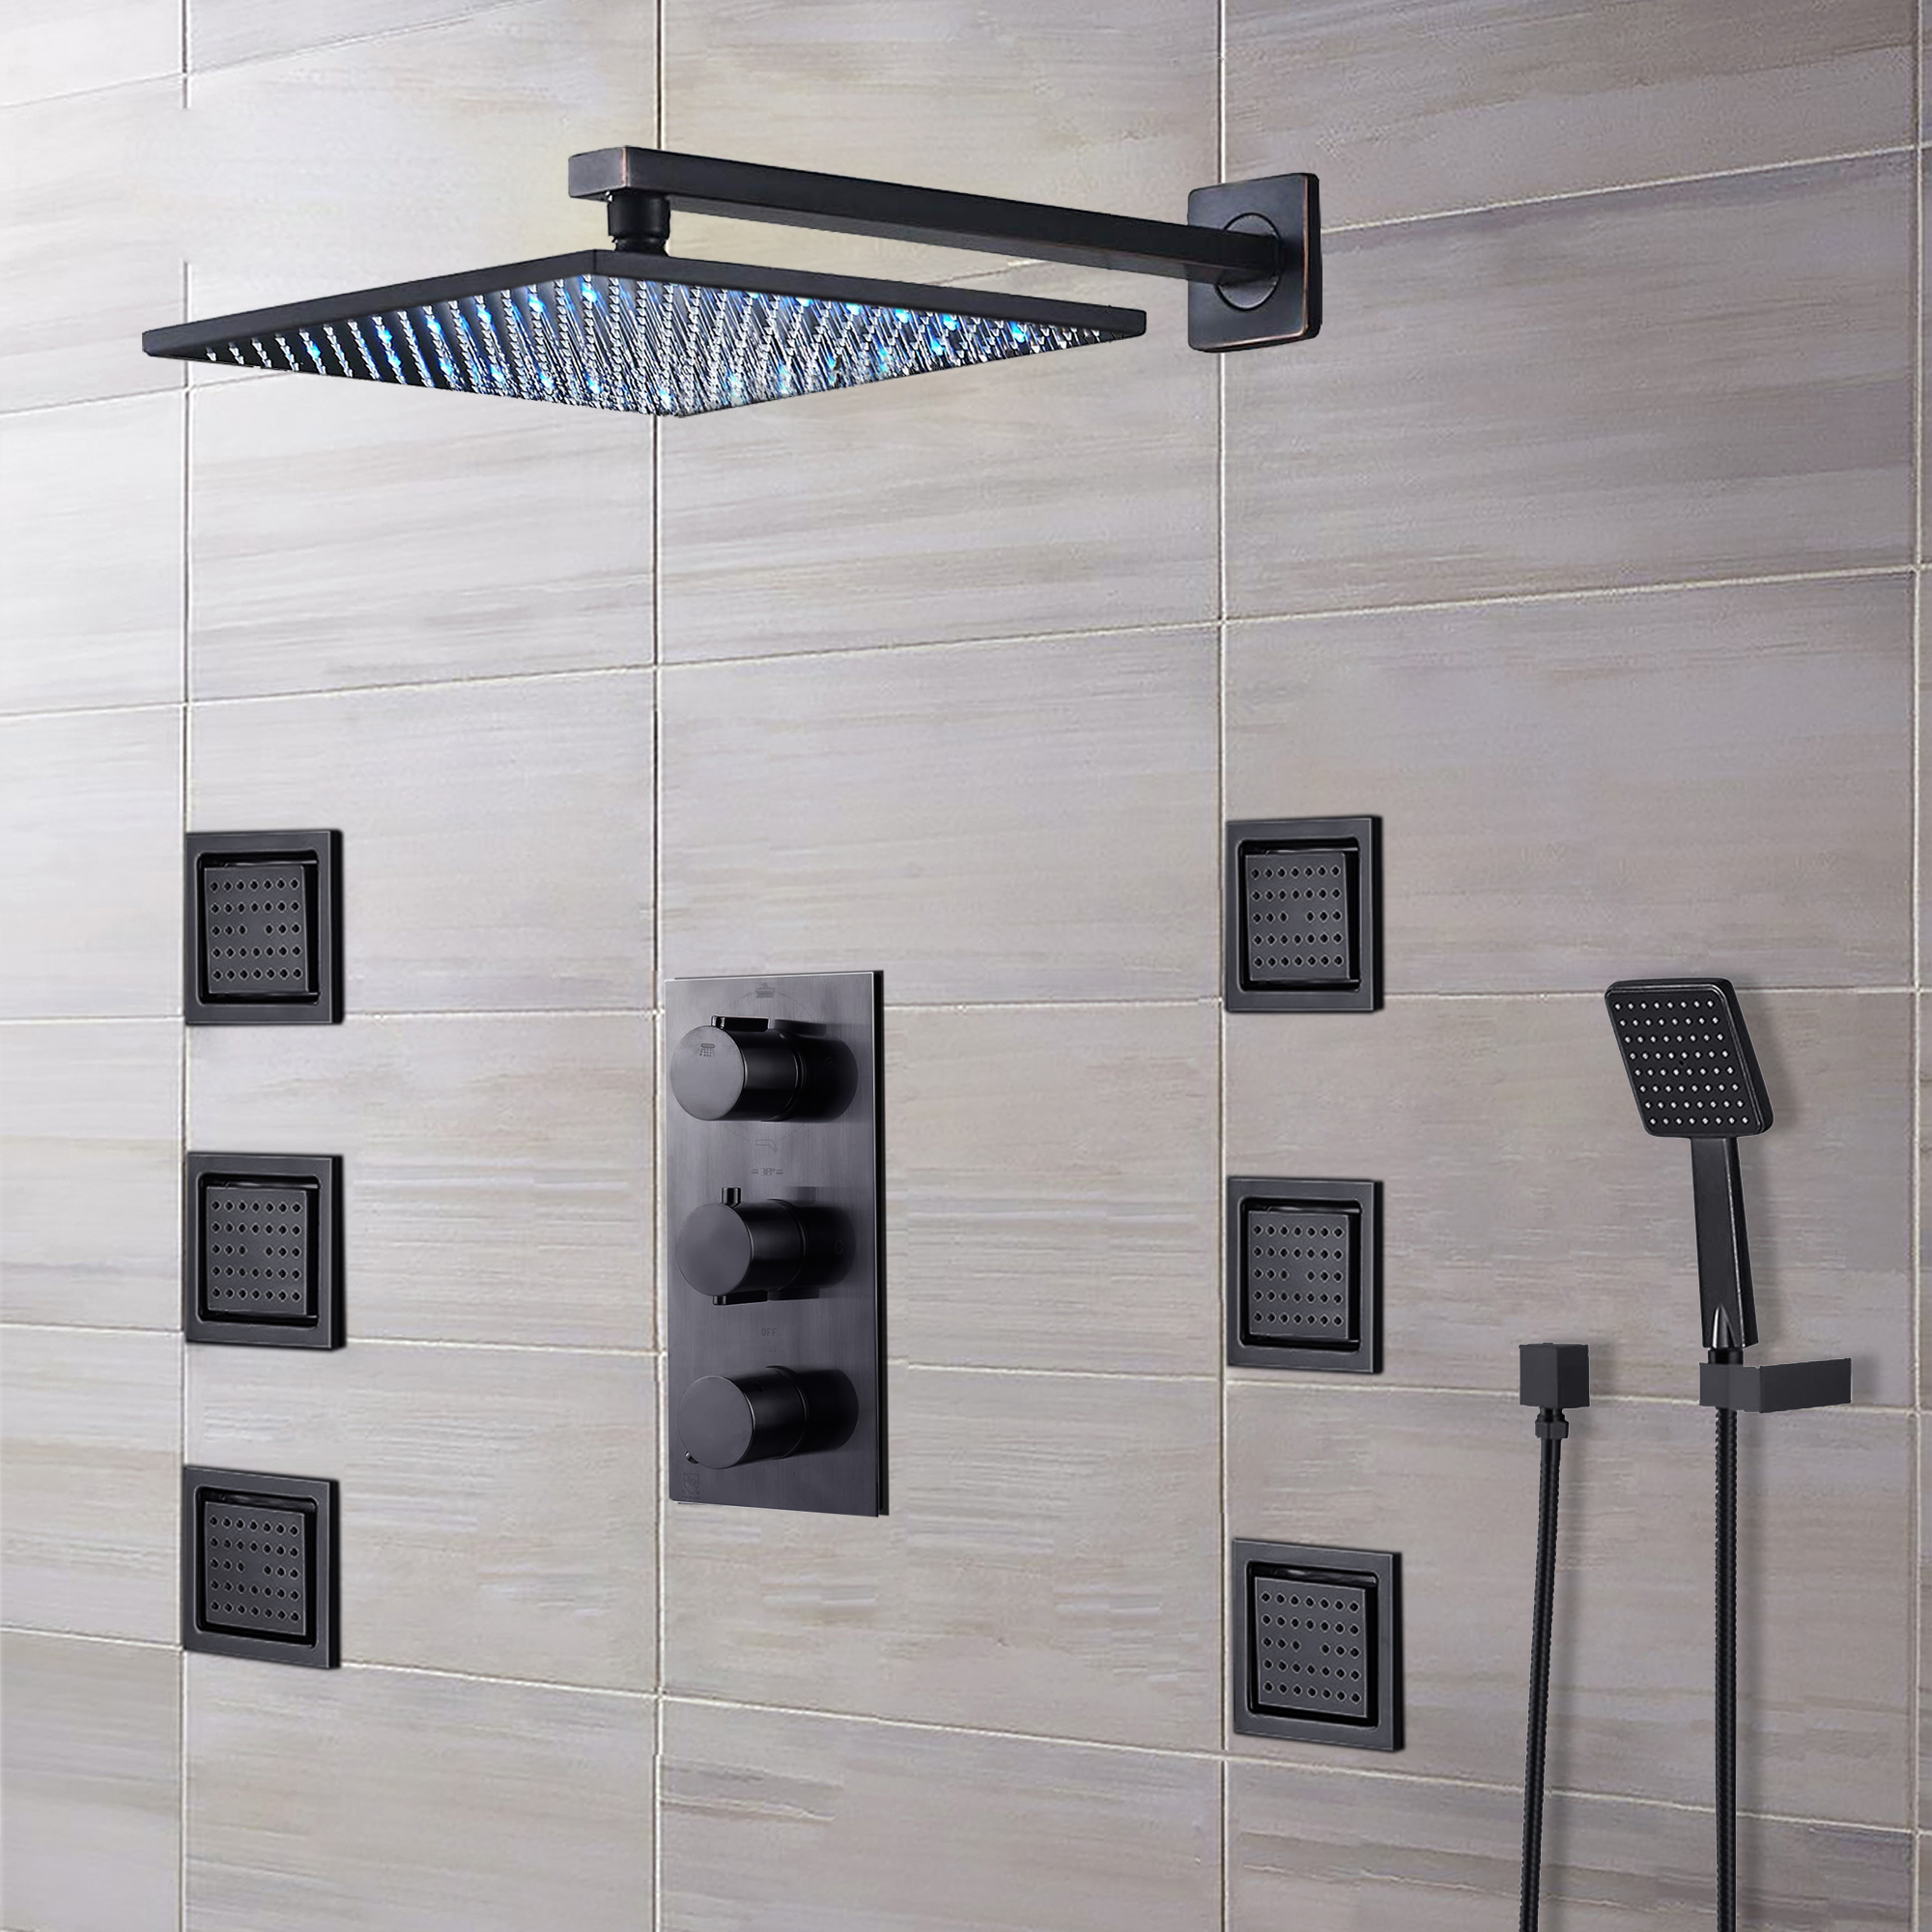 https://www.bathselect.com/v/vspfiles/assets/images/BathSelect%20DORB%20Sierra%20Multi%20Color%20Water%20Powered%20Led%20Shower%20with%20Adjustable%20Body%20Jets%20and%20Mixer-Wall%20Mount%20Style.jpg